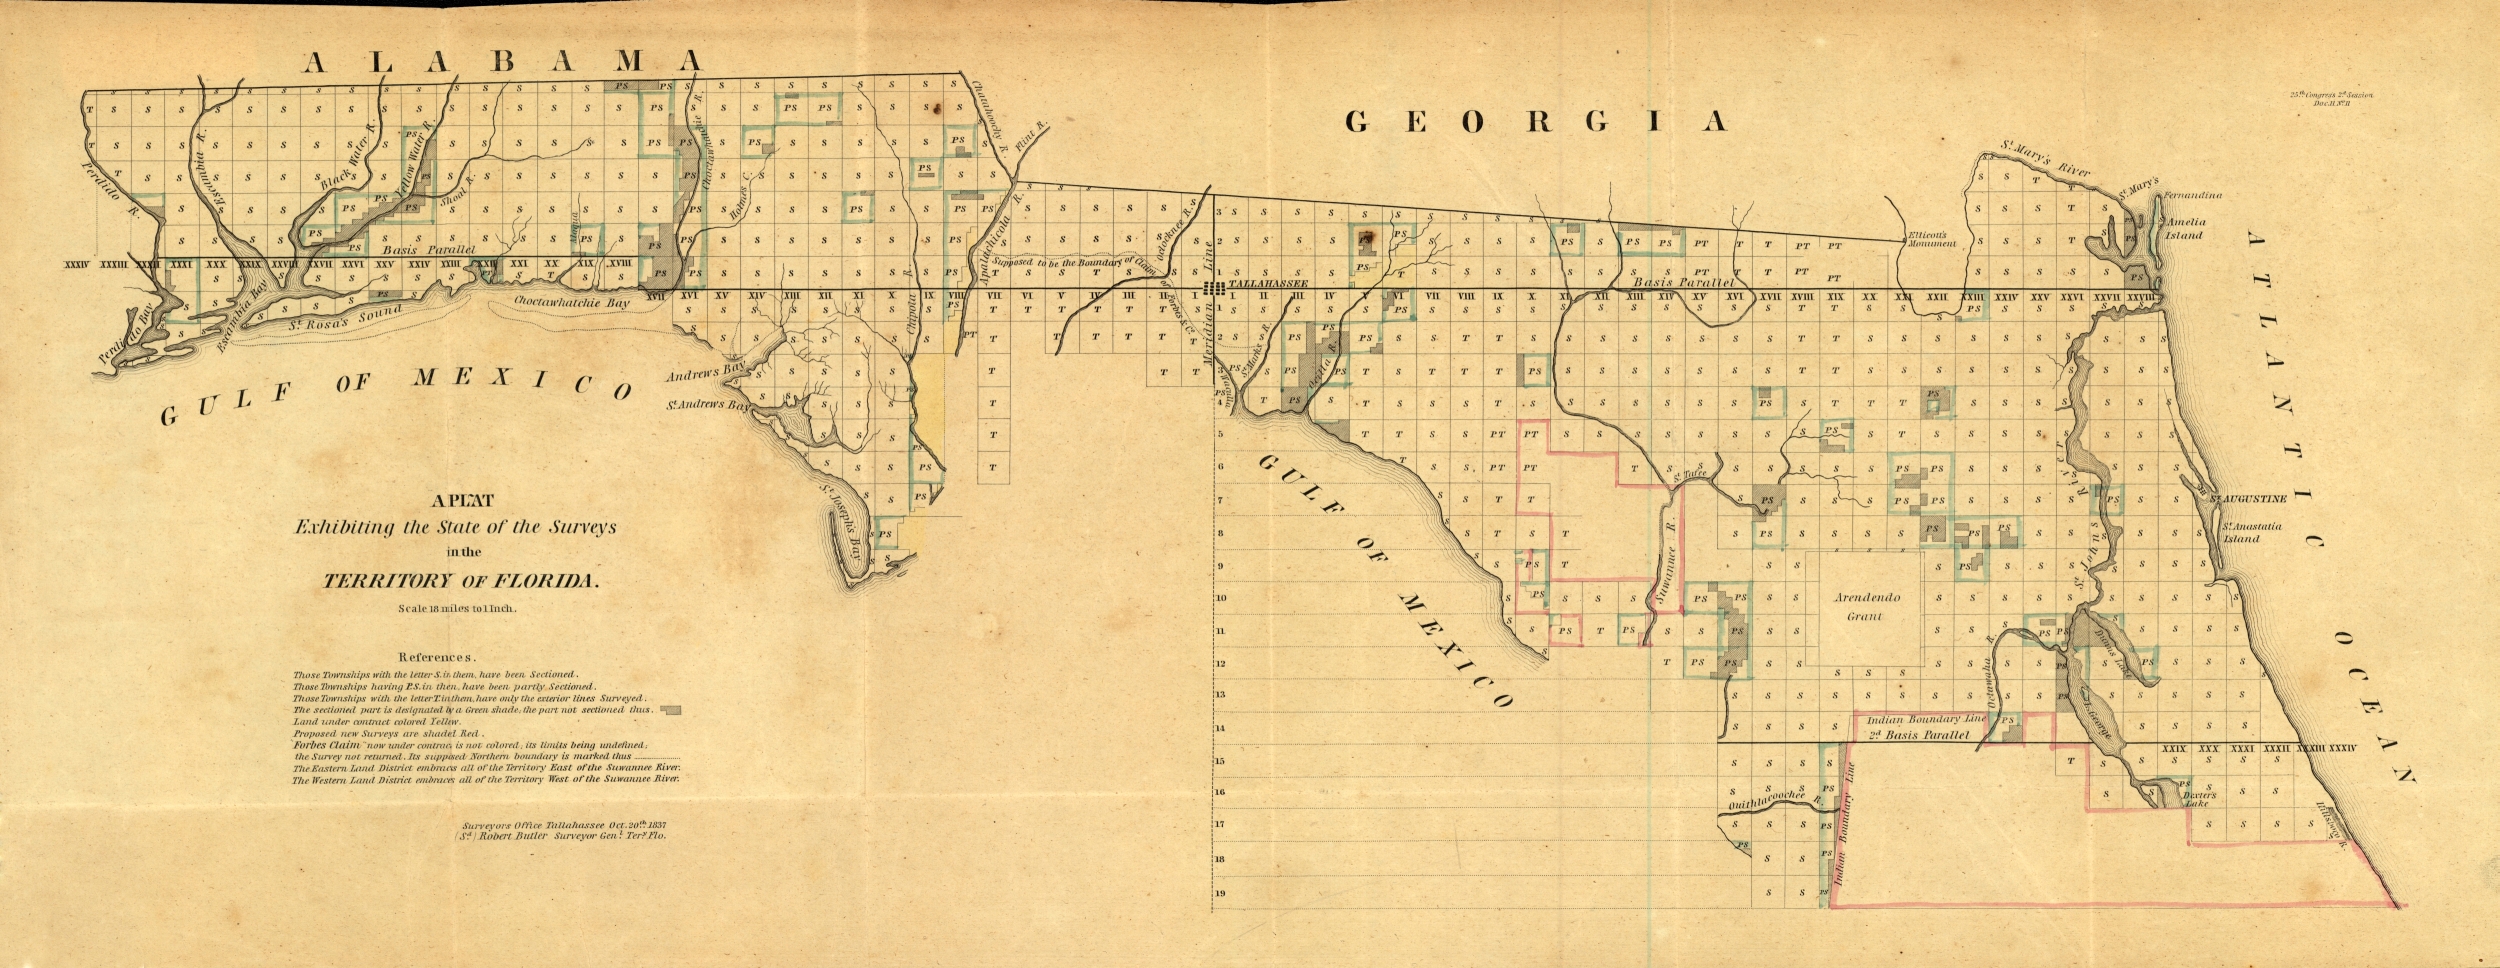 State of the Surveys of Territorial Florida, 1837